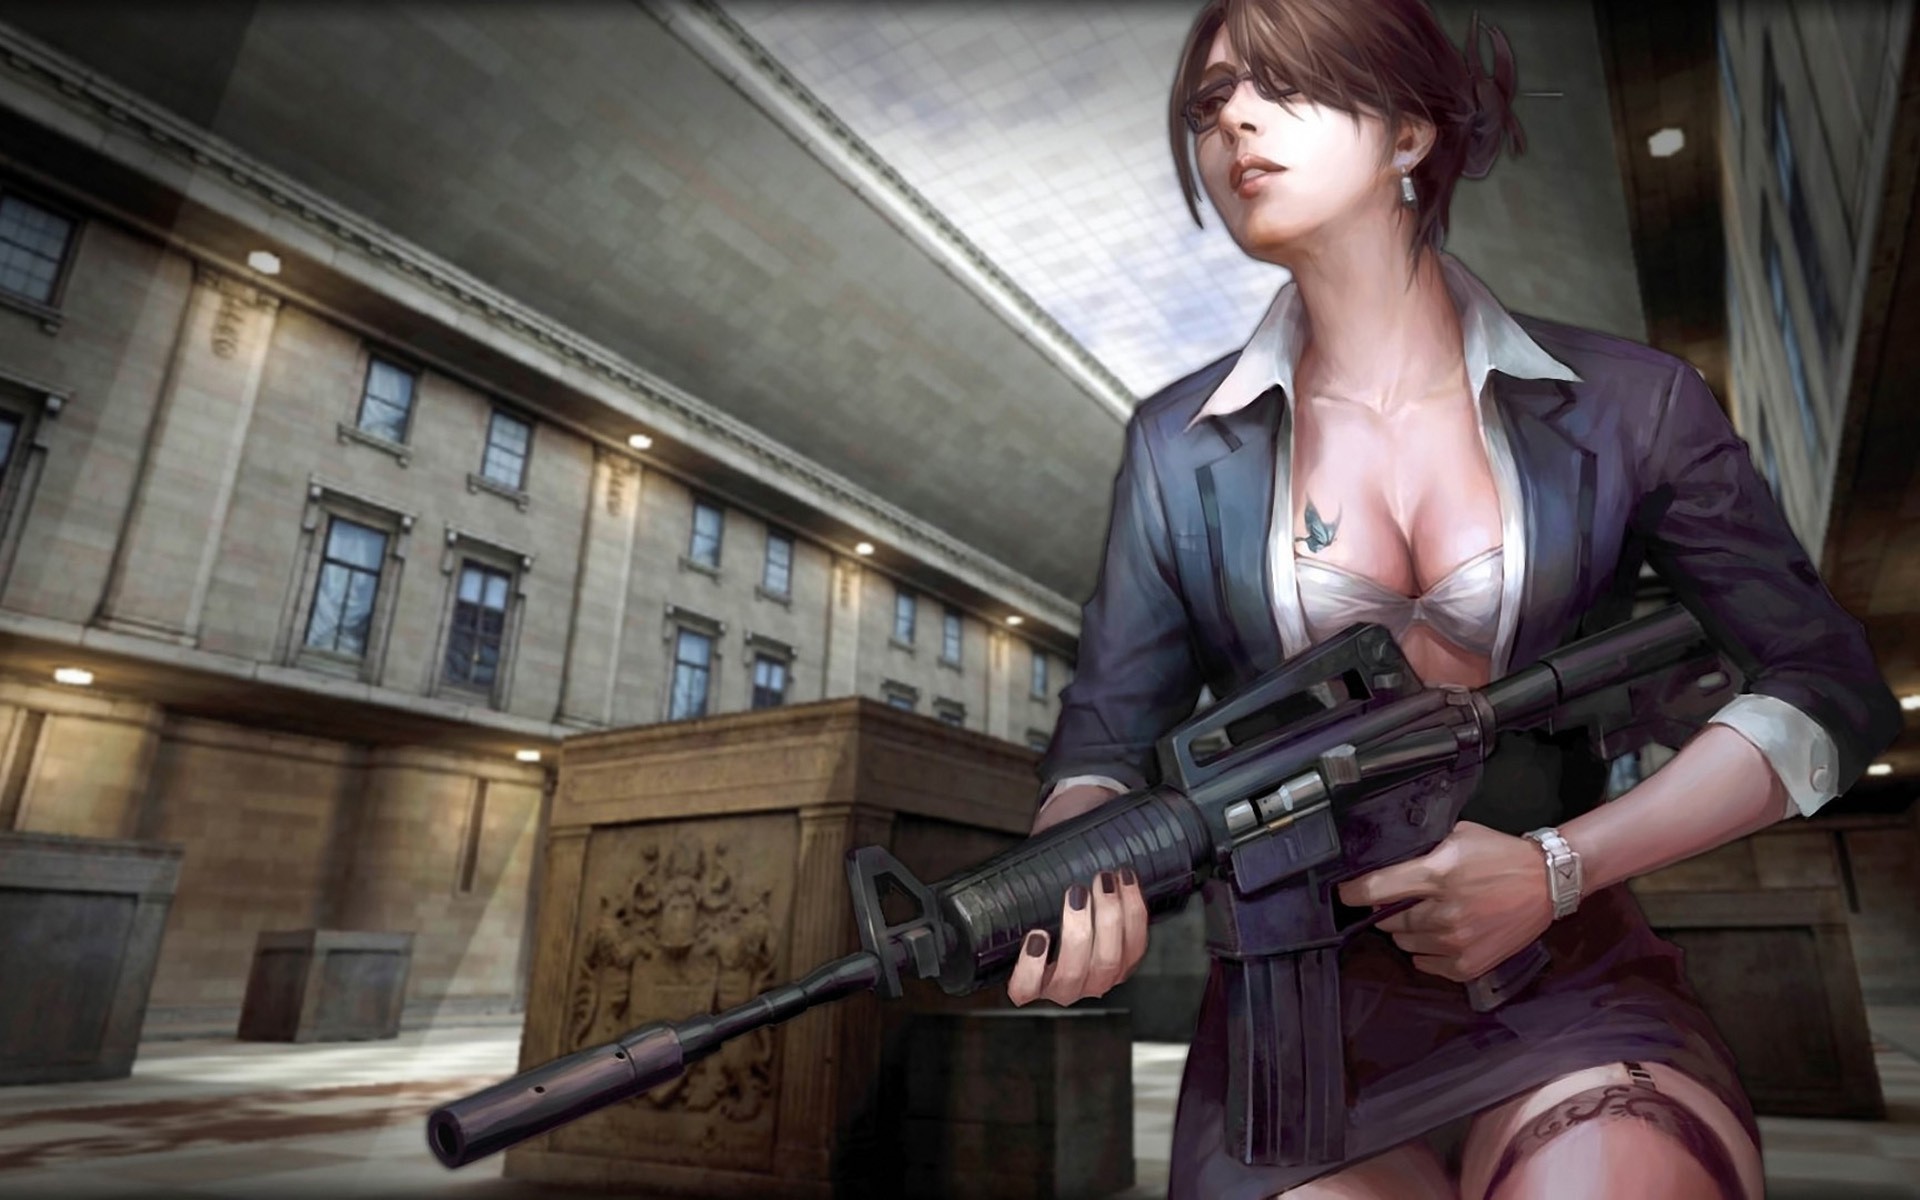 Formal Girl With Gun Free Awesome Image For Mobile